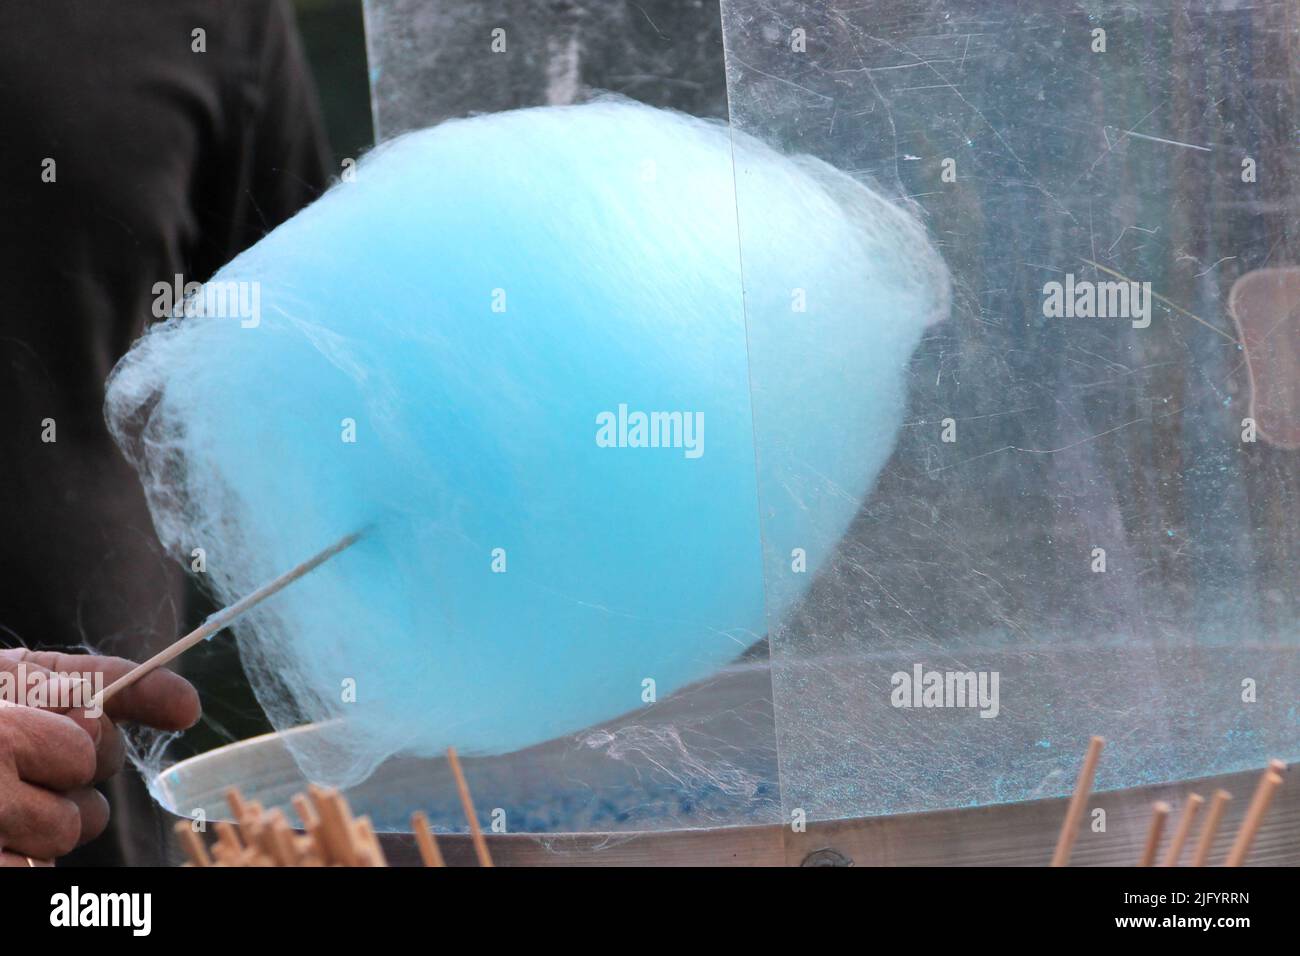 Candy floss. Cotton candy. Stock Photo